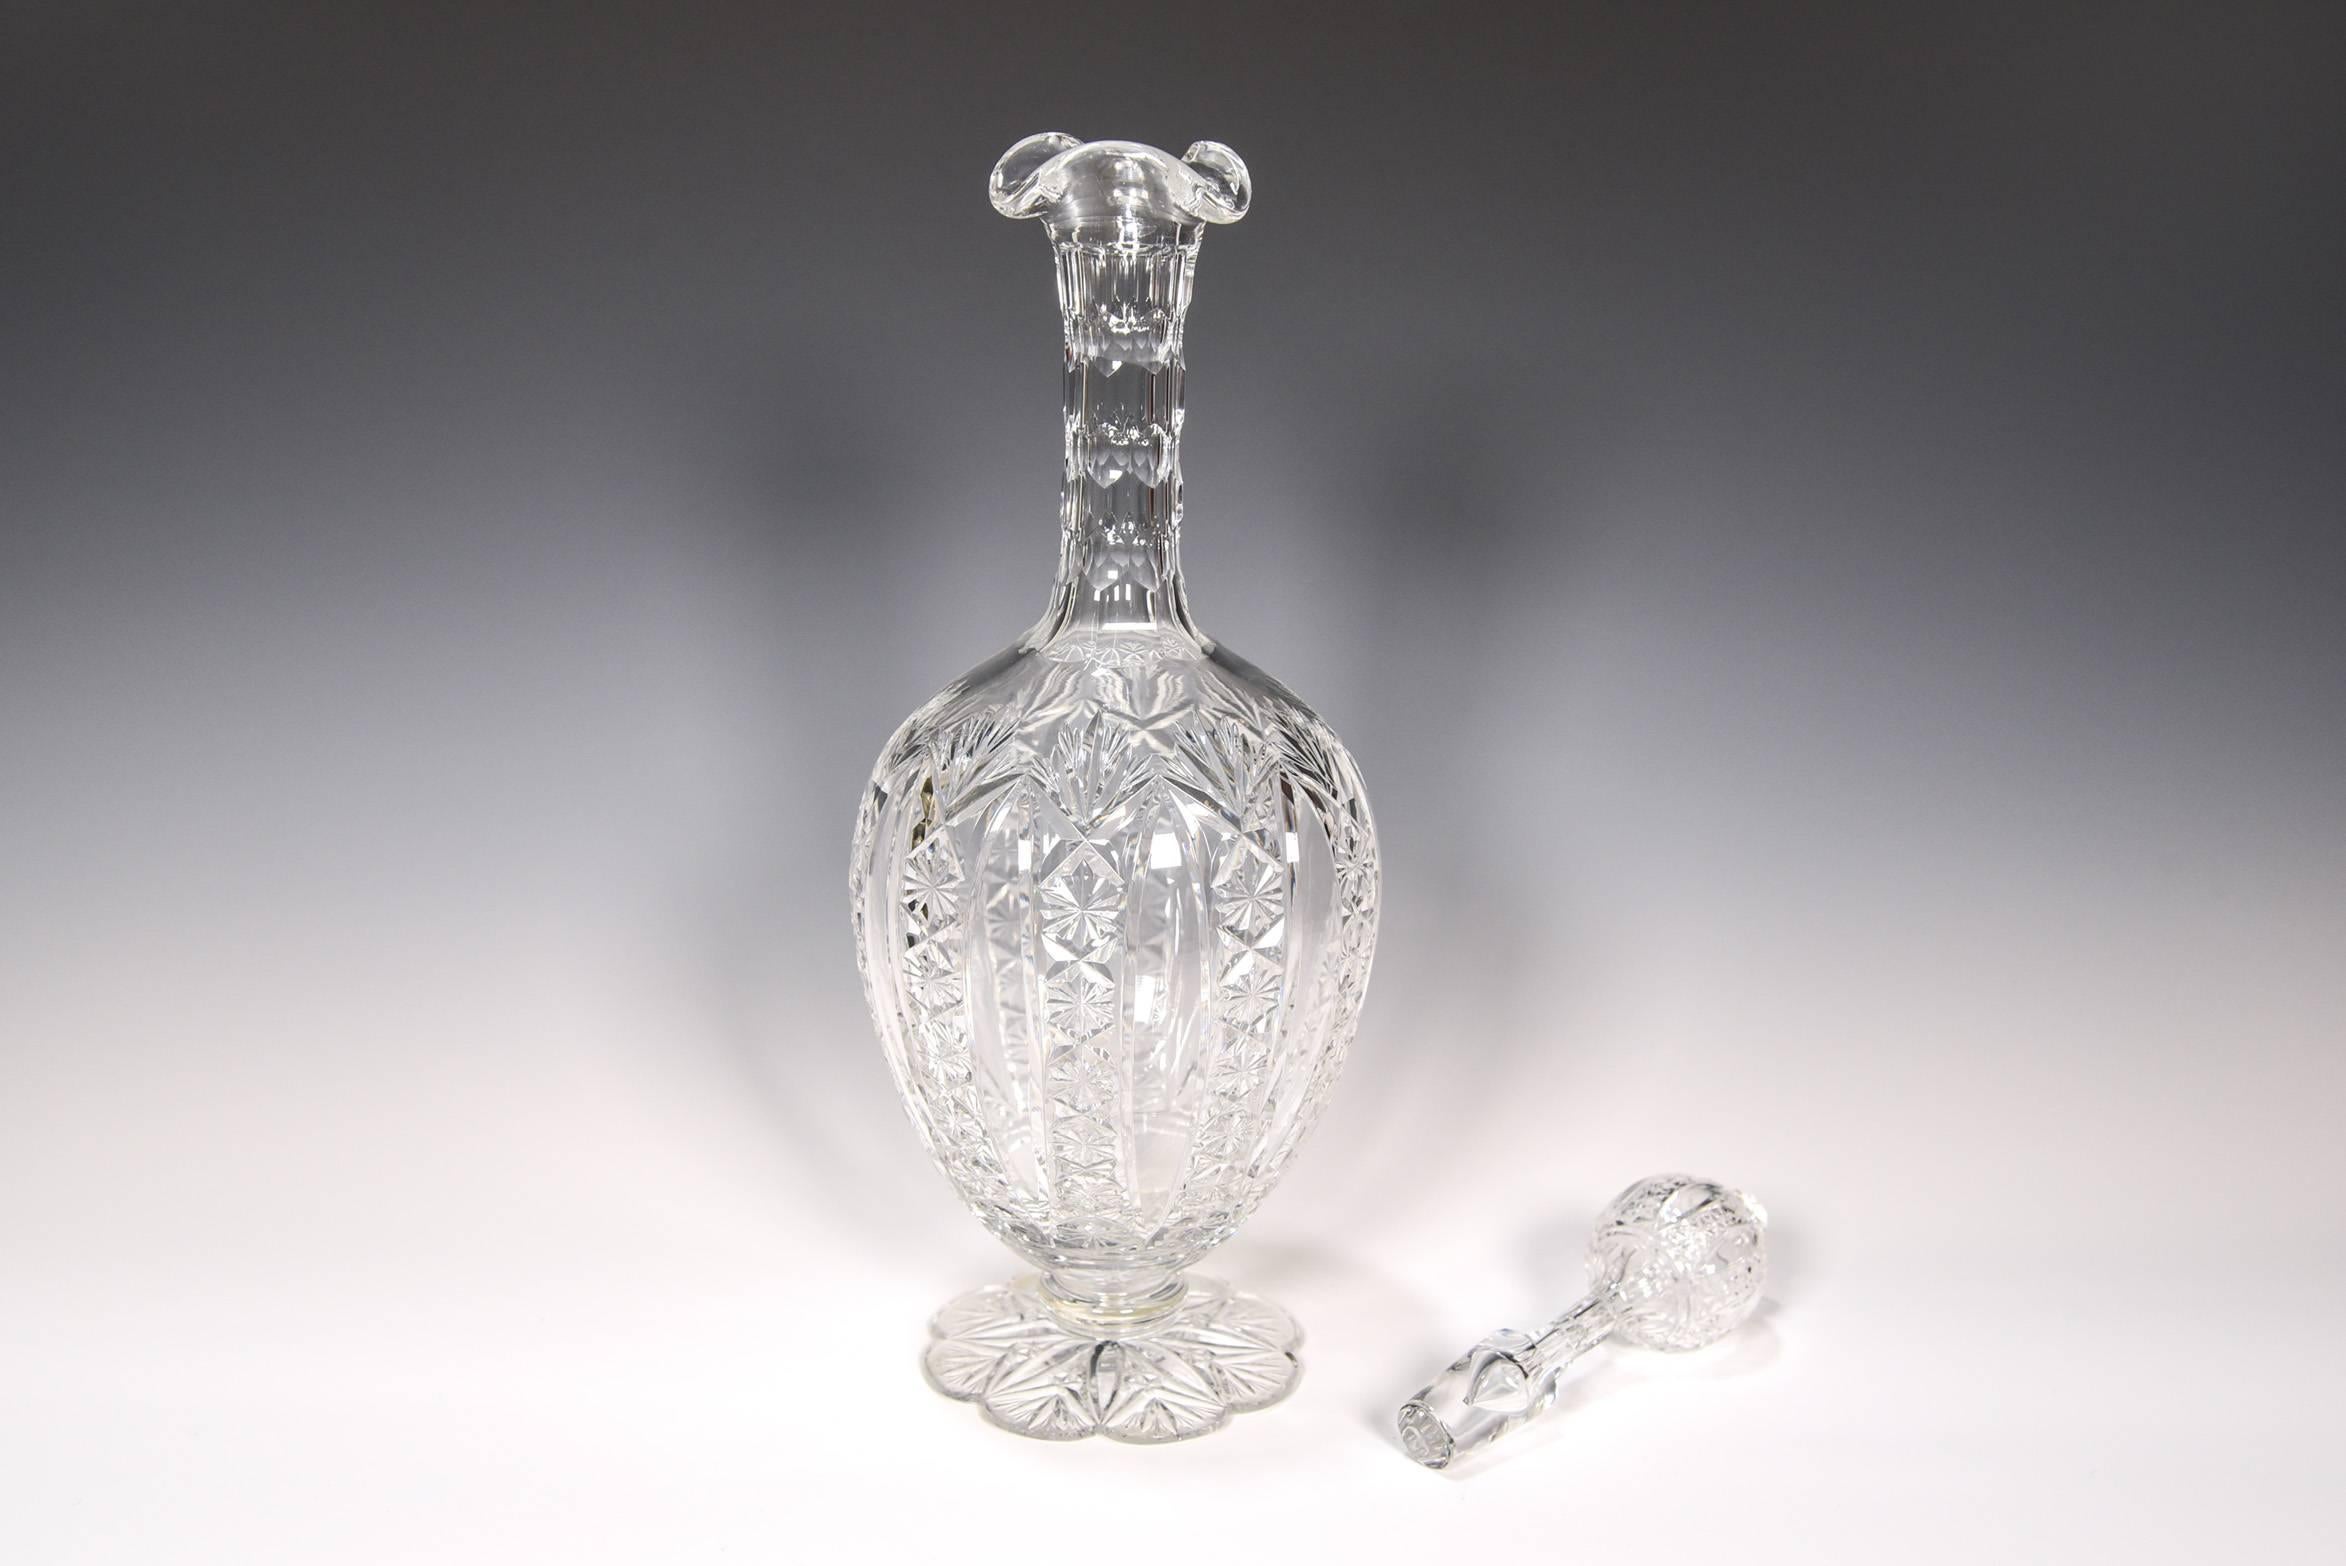 This beautiful decanter is handblown crystal made by the Cristalleries De Baccarat. It is decorated in the most complex and masterful Conde pattern, first introduced in 1908 with amazing intricately cut and notched stems and spreading petal cut